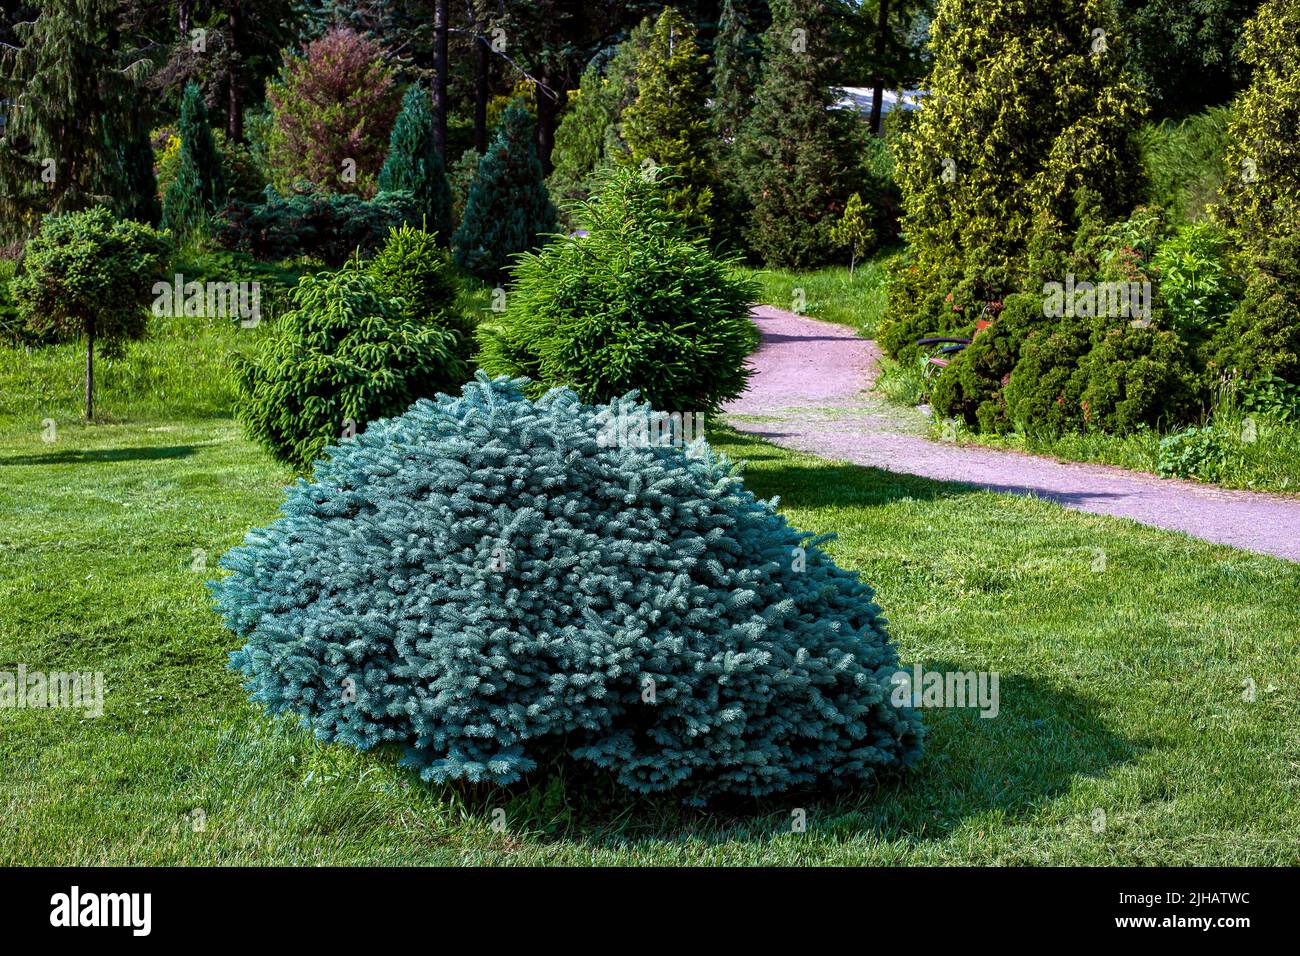 Pine bushes and trees in a park area with a green lawn and a dirt path among plants illuminated by sunlight on a summer day for a walk in the fresh ai Stock Photo